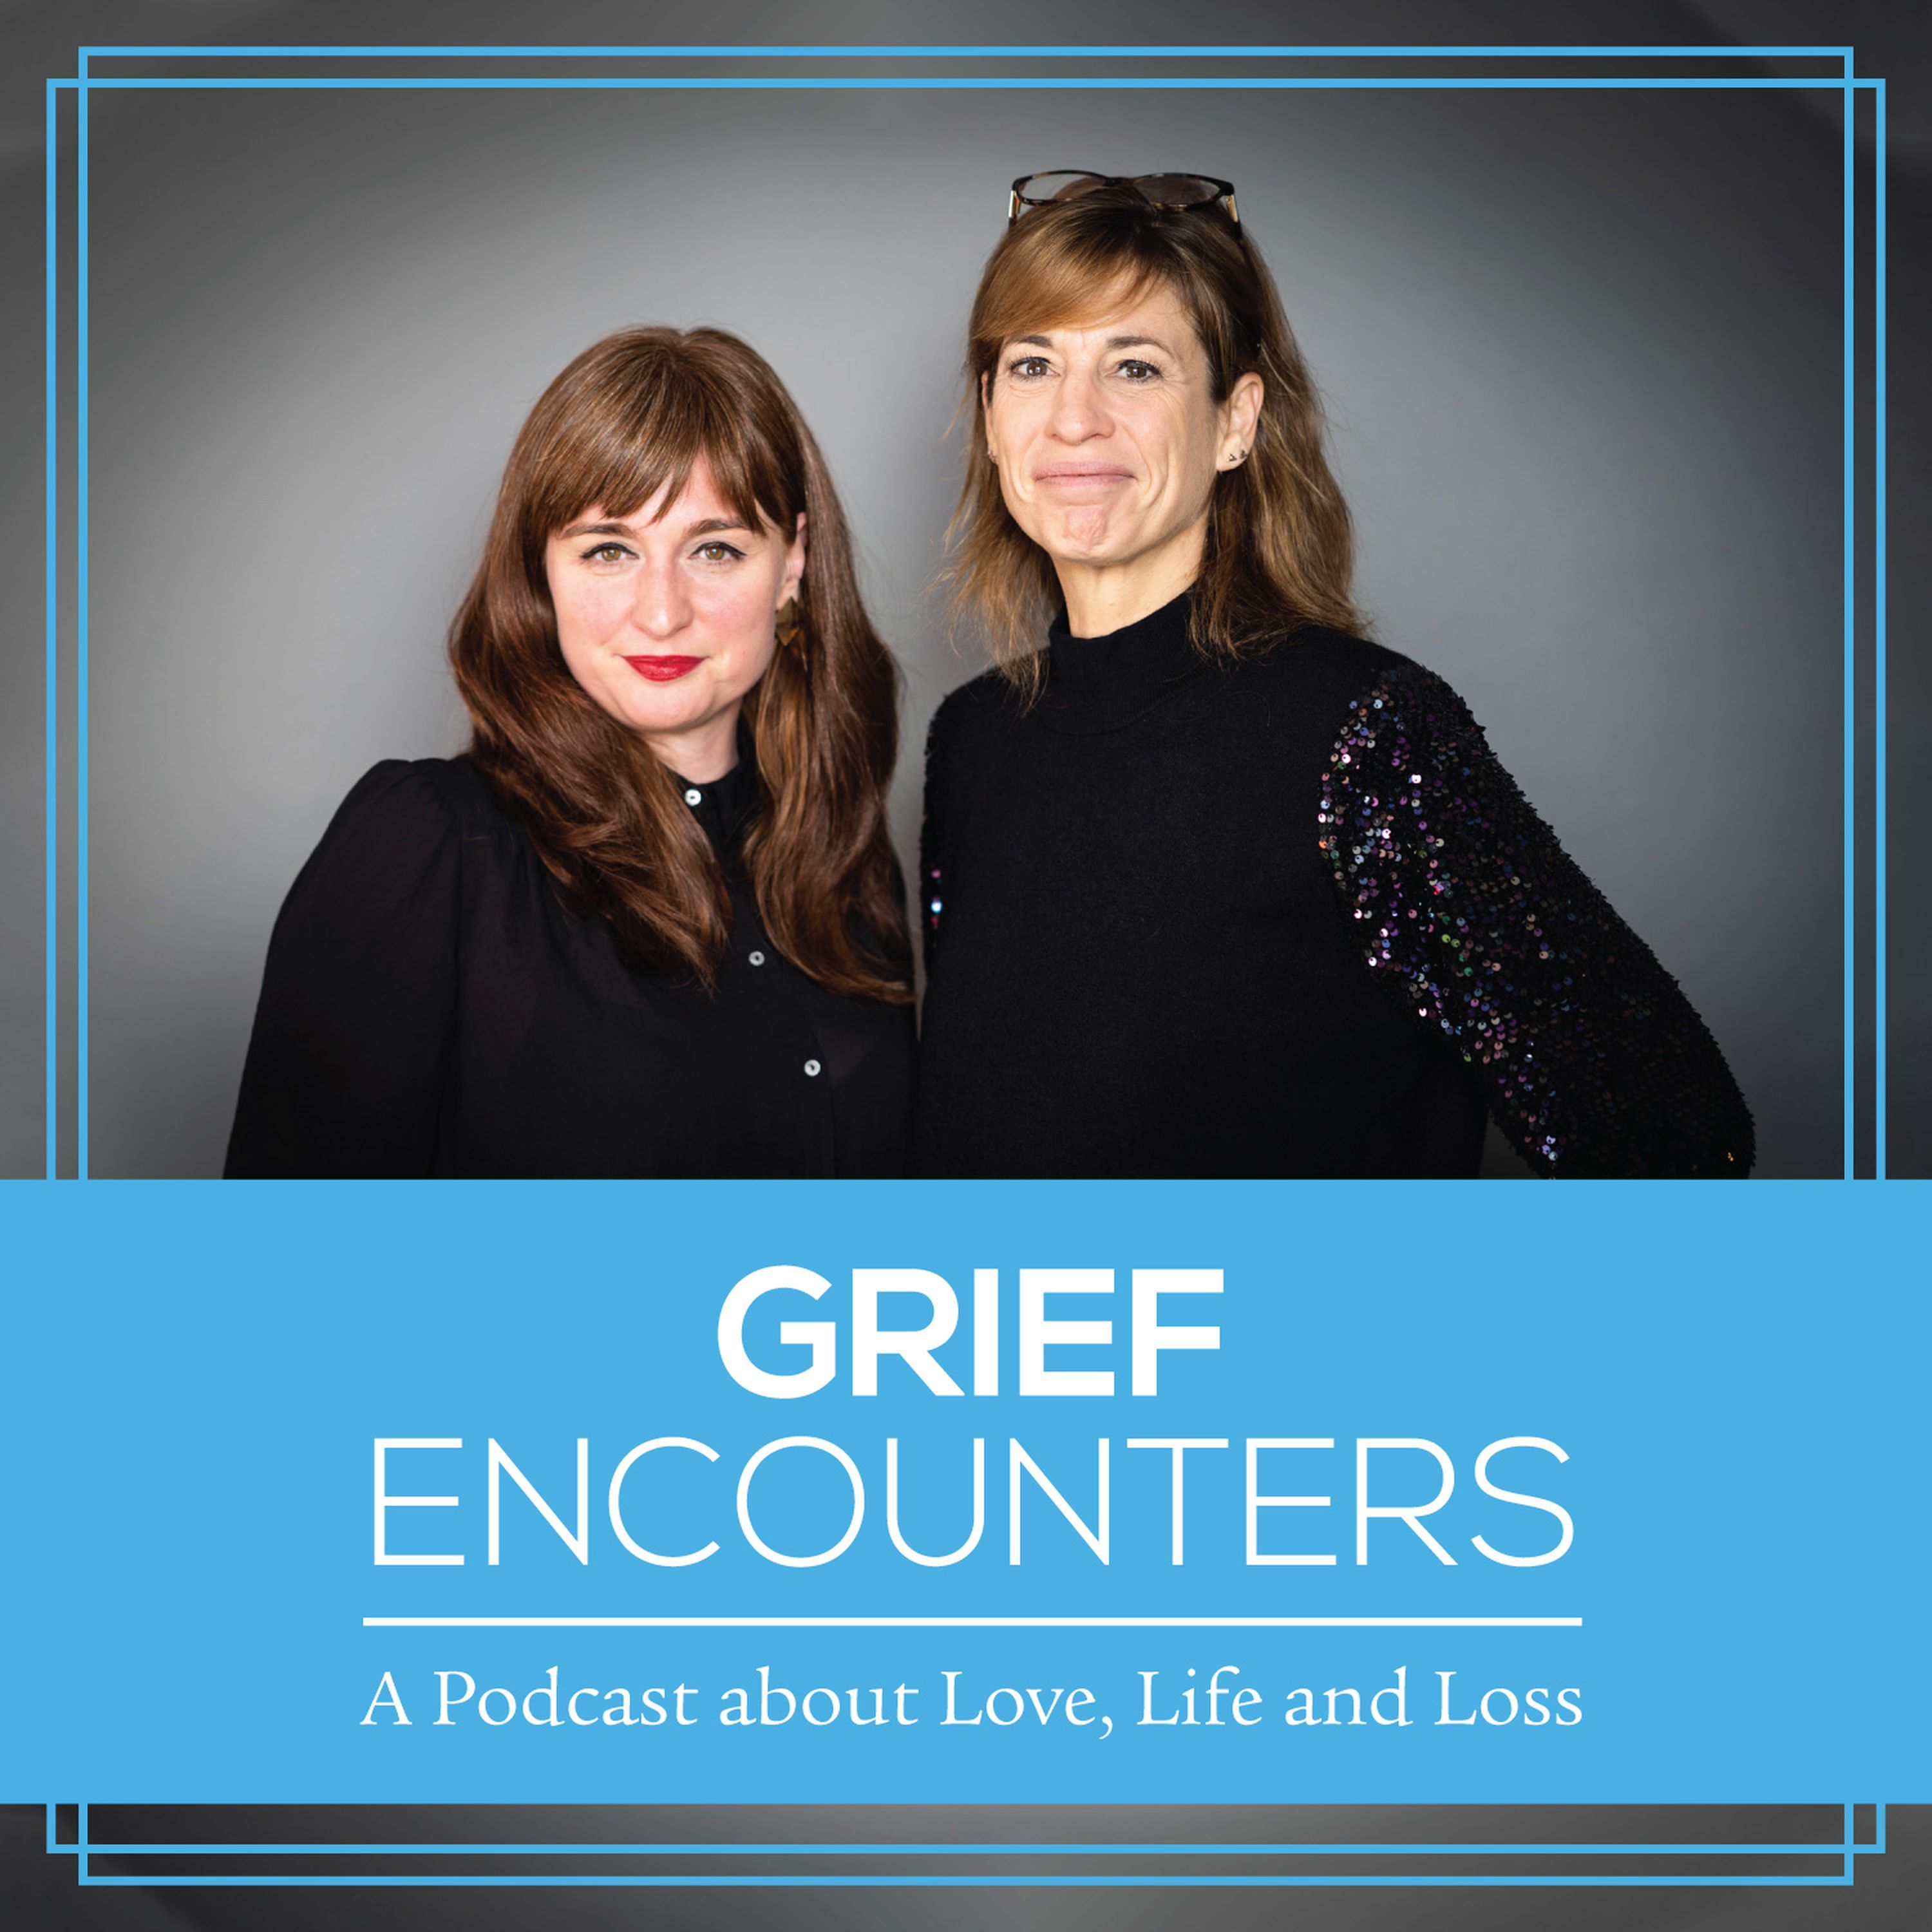 The Importance Of Grief Support with Colette Byrne